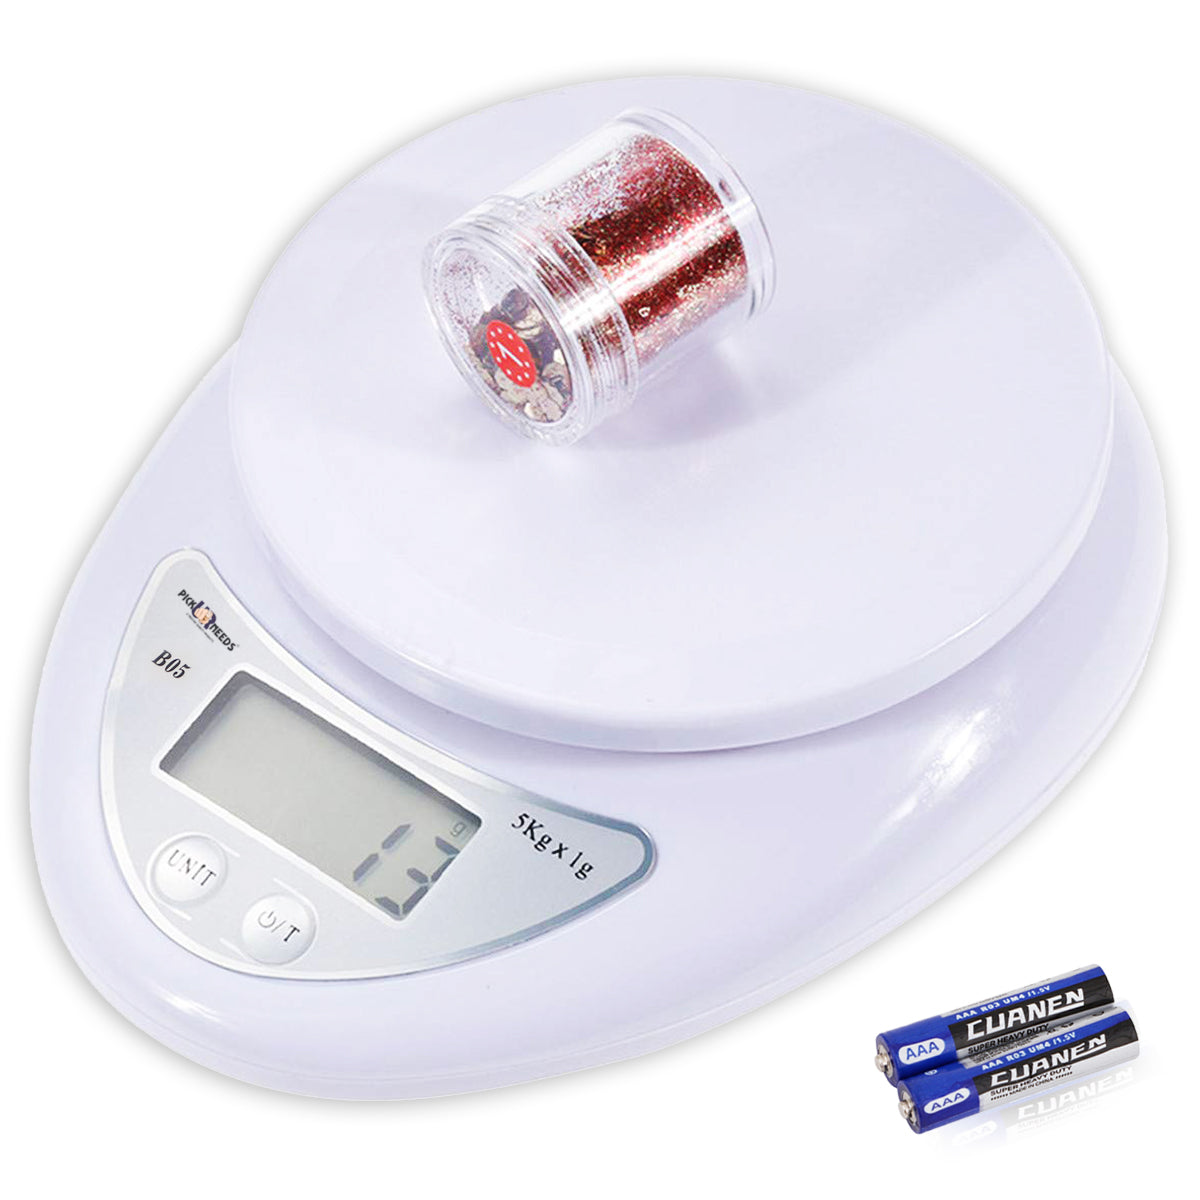 Pick Ur Needs Electronic Digital Kitchen Food Scale Multifunction Weight Scale with Removable Bowl | Lightweight and Durable Design